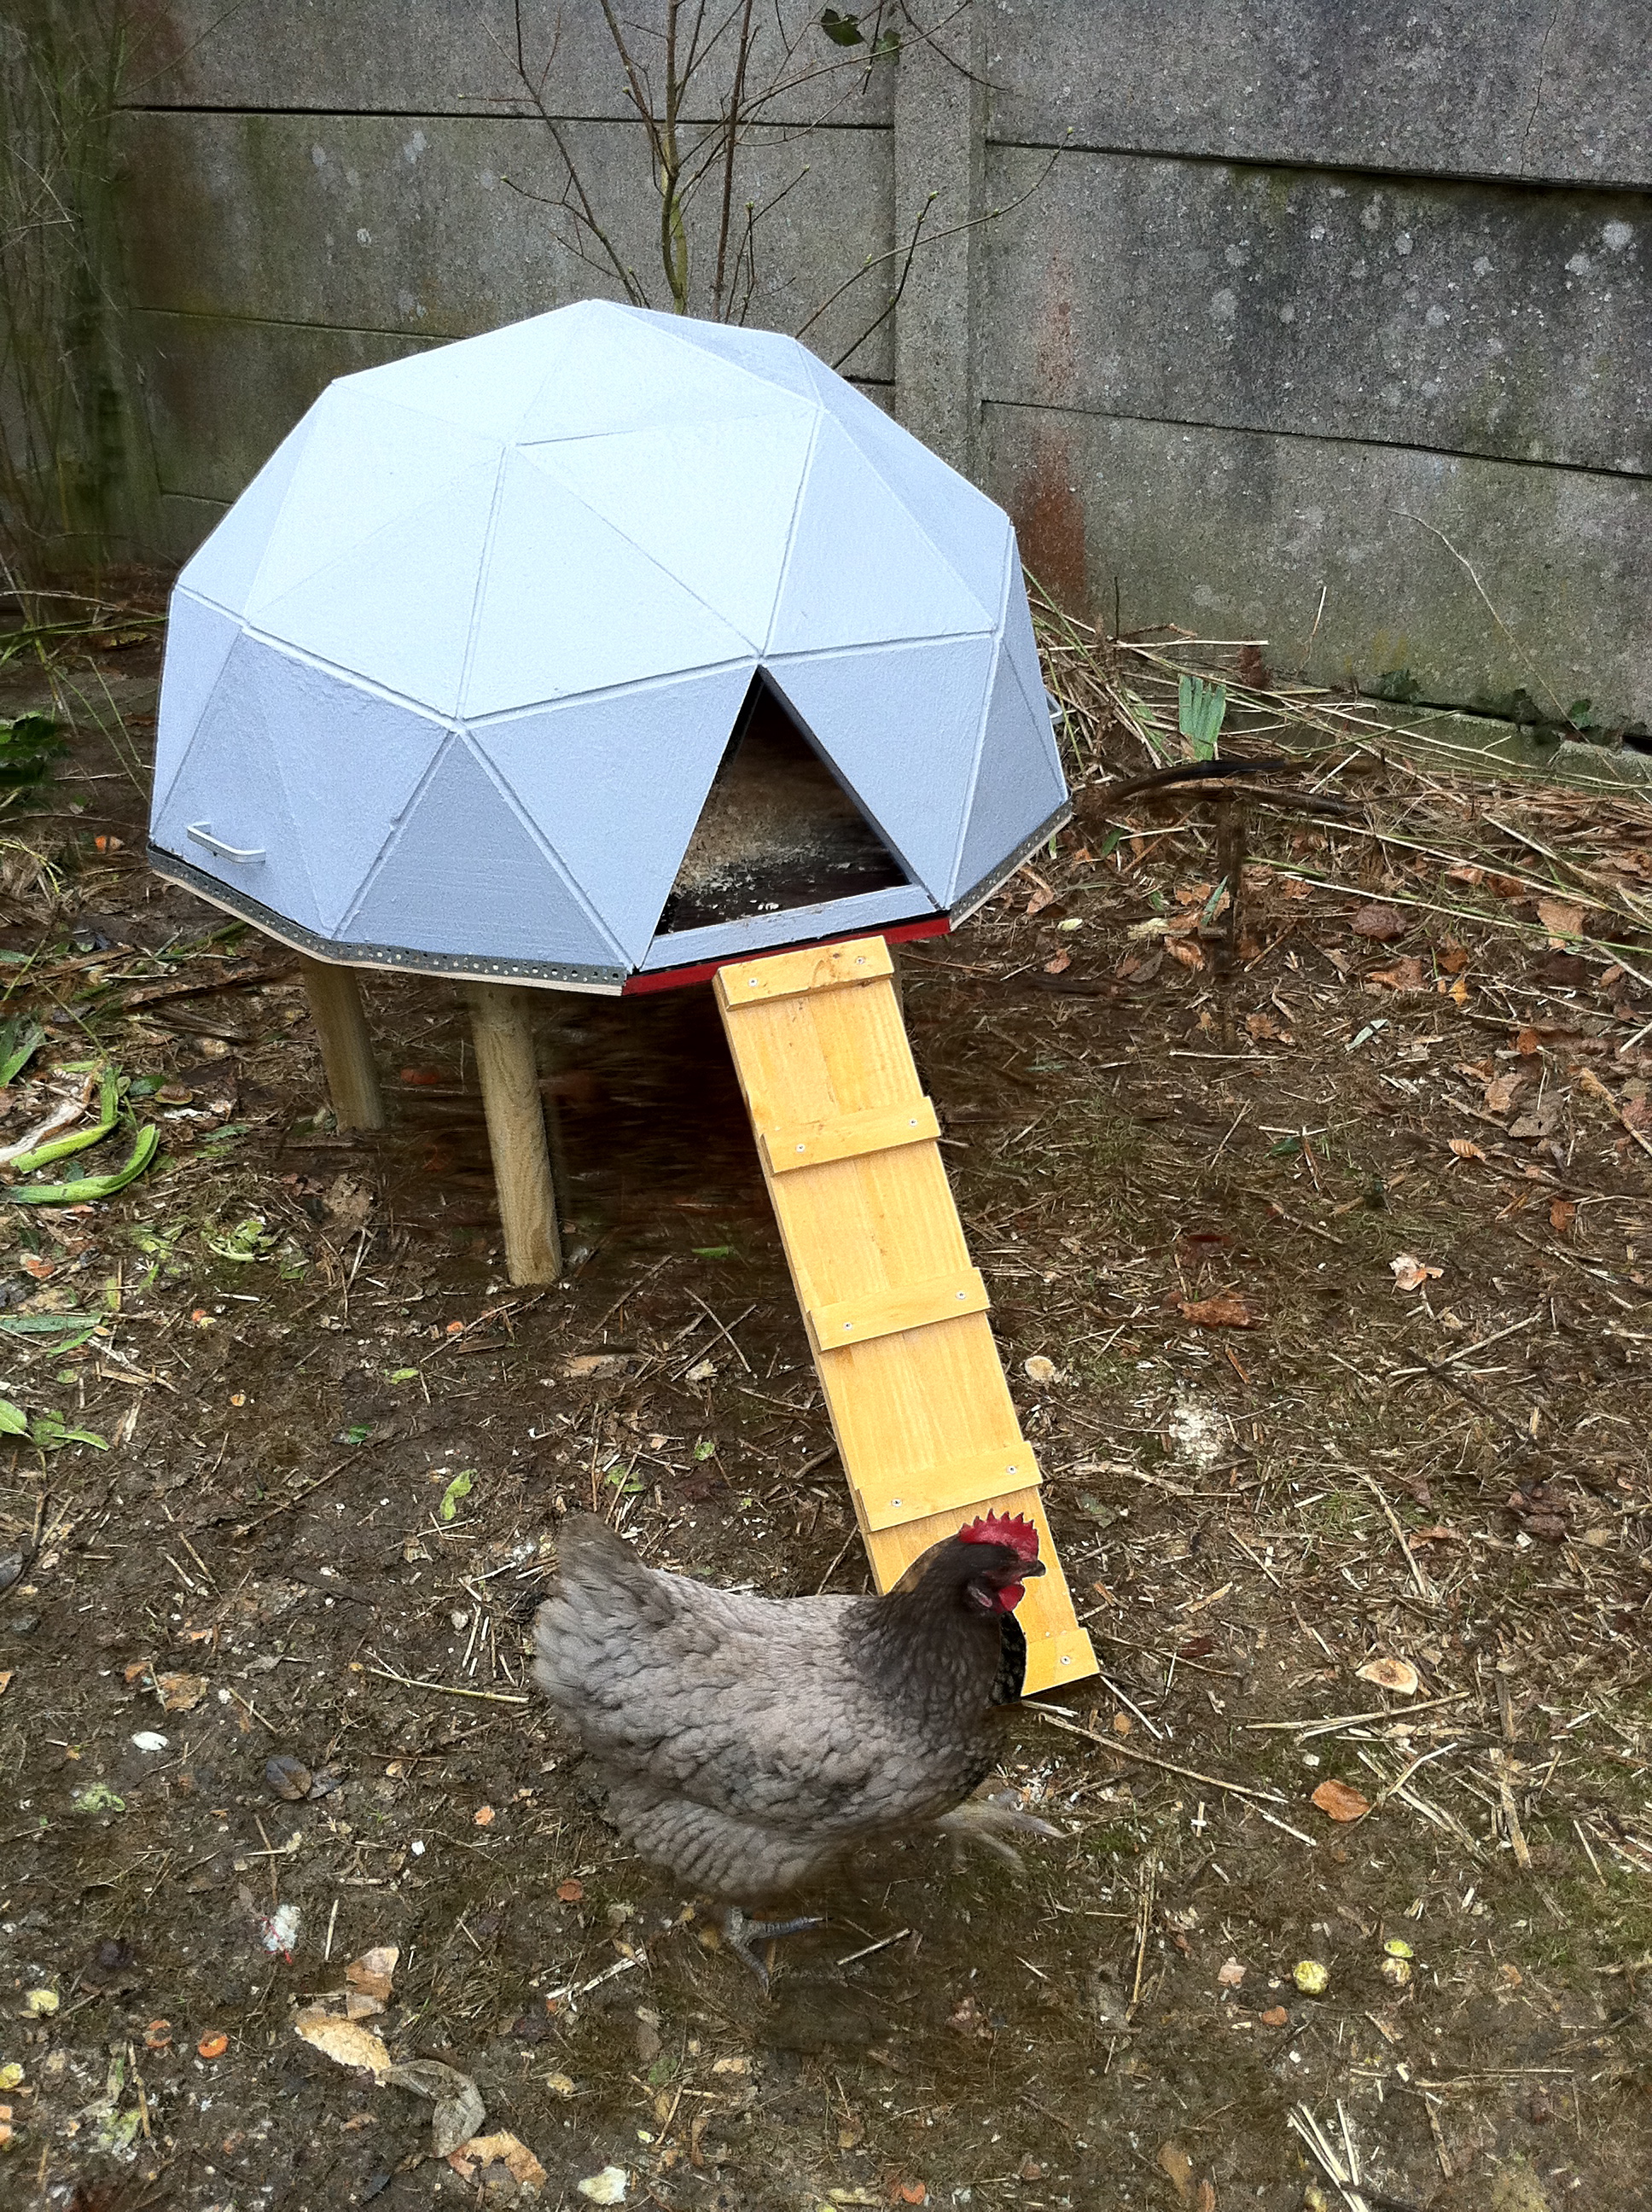 ... as such, I created my own nonconventional geodesic dome chicken house